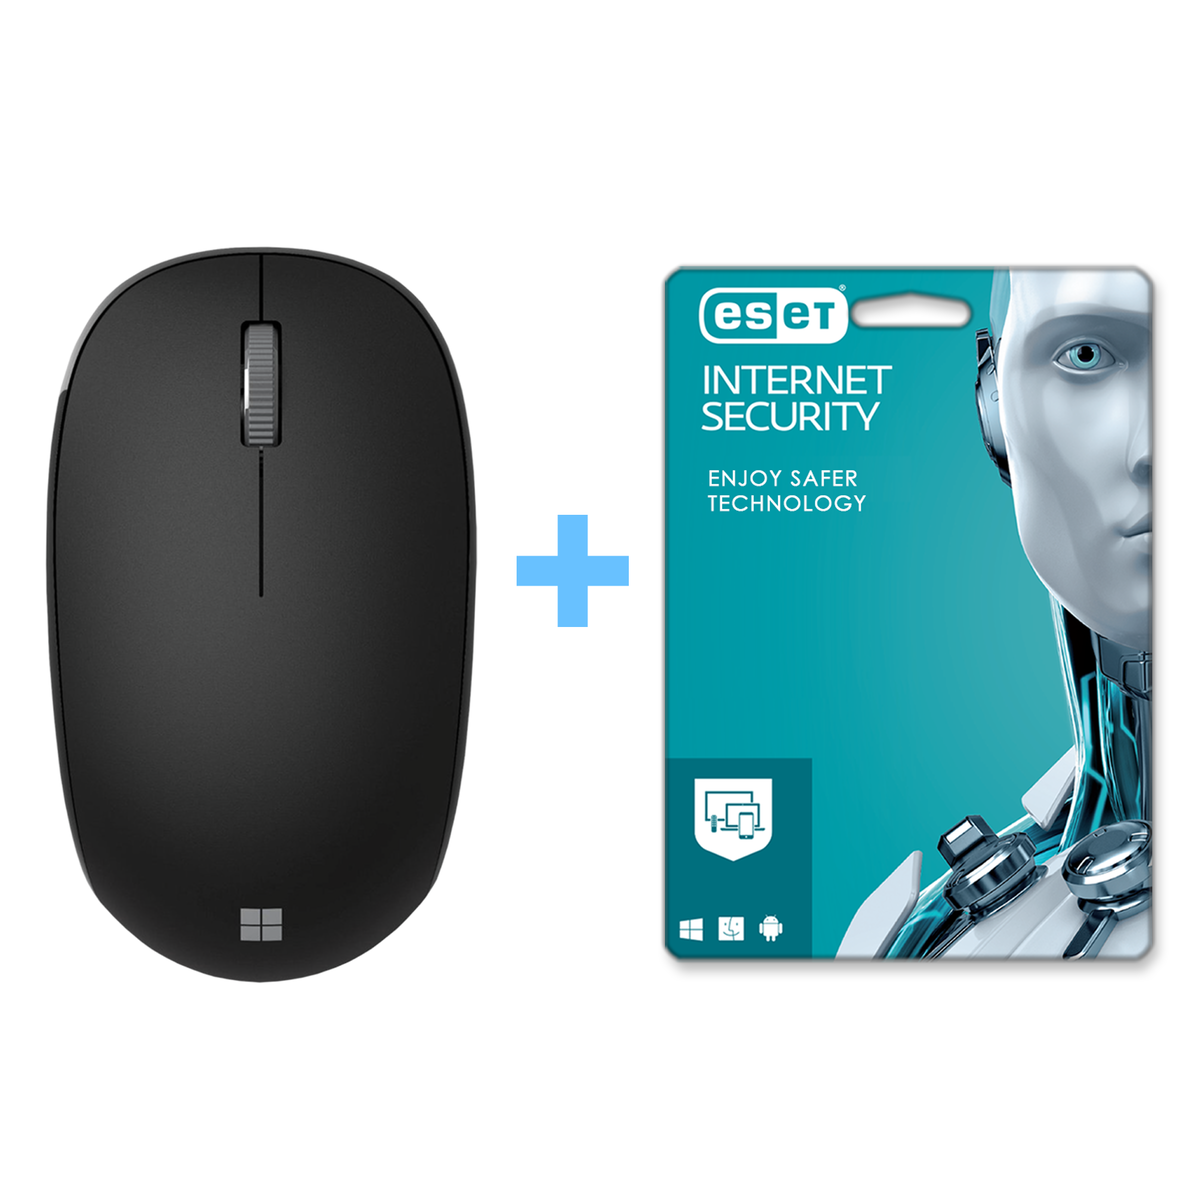 Kit Licencia ESET Internet Security + Mouse Microsoft Bluetooth Mouse Color Negro - Multimax